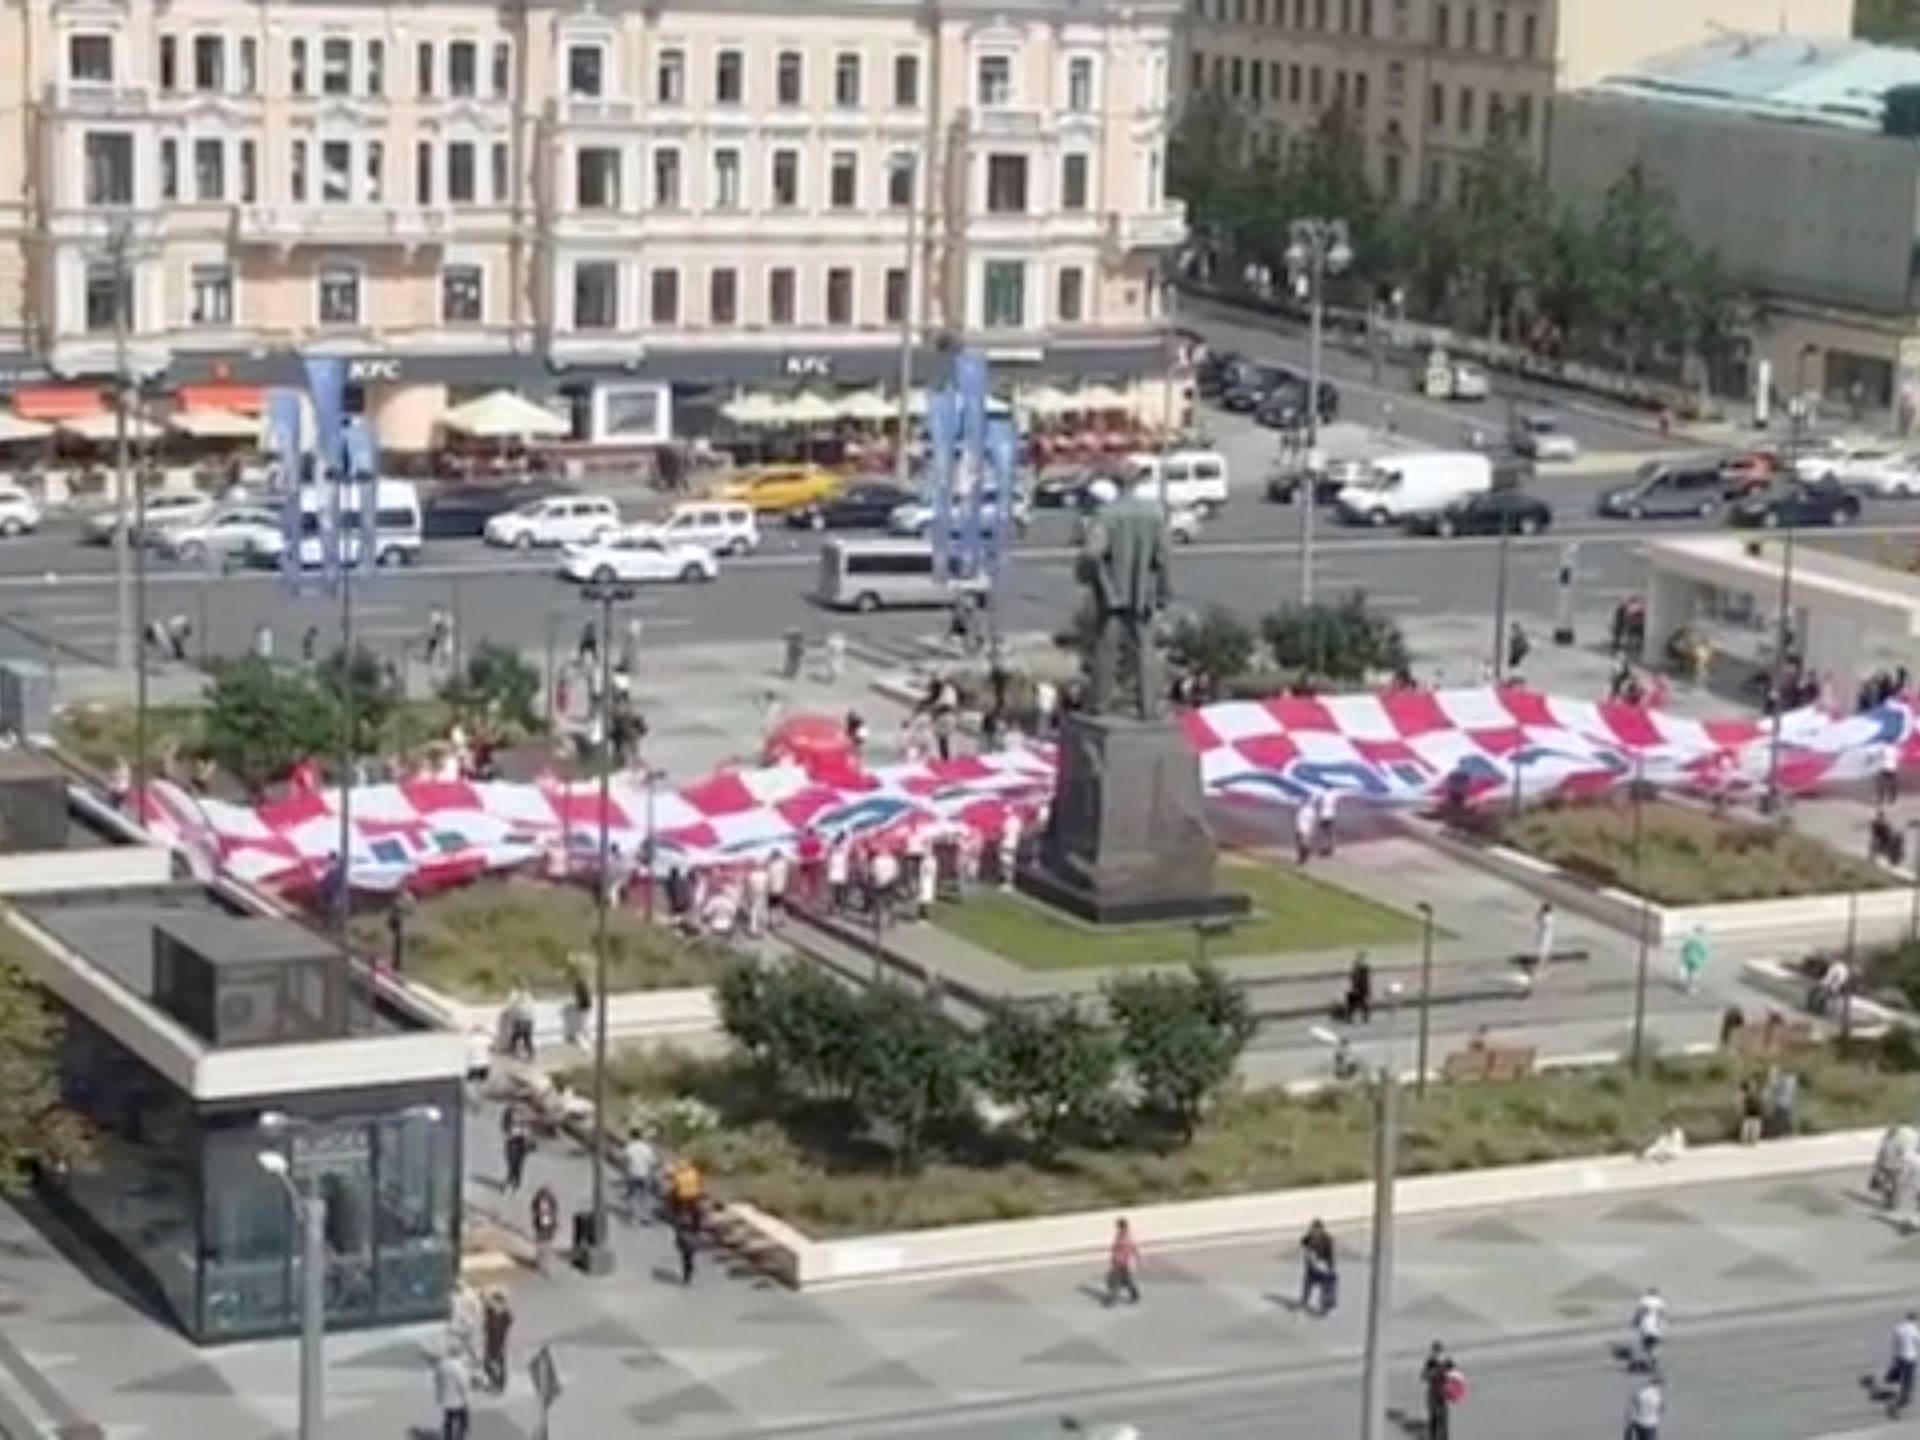 A giant Croatia flag with the inscription "Thank you, Russia" in Russian is seen at Triumfalnaya Square in Moscow